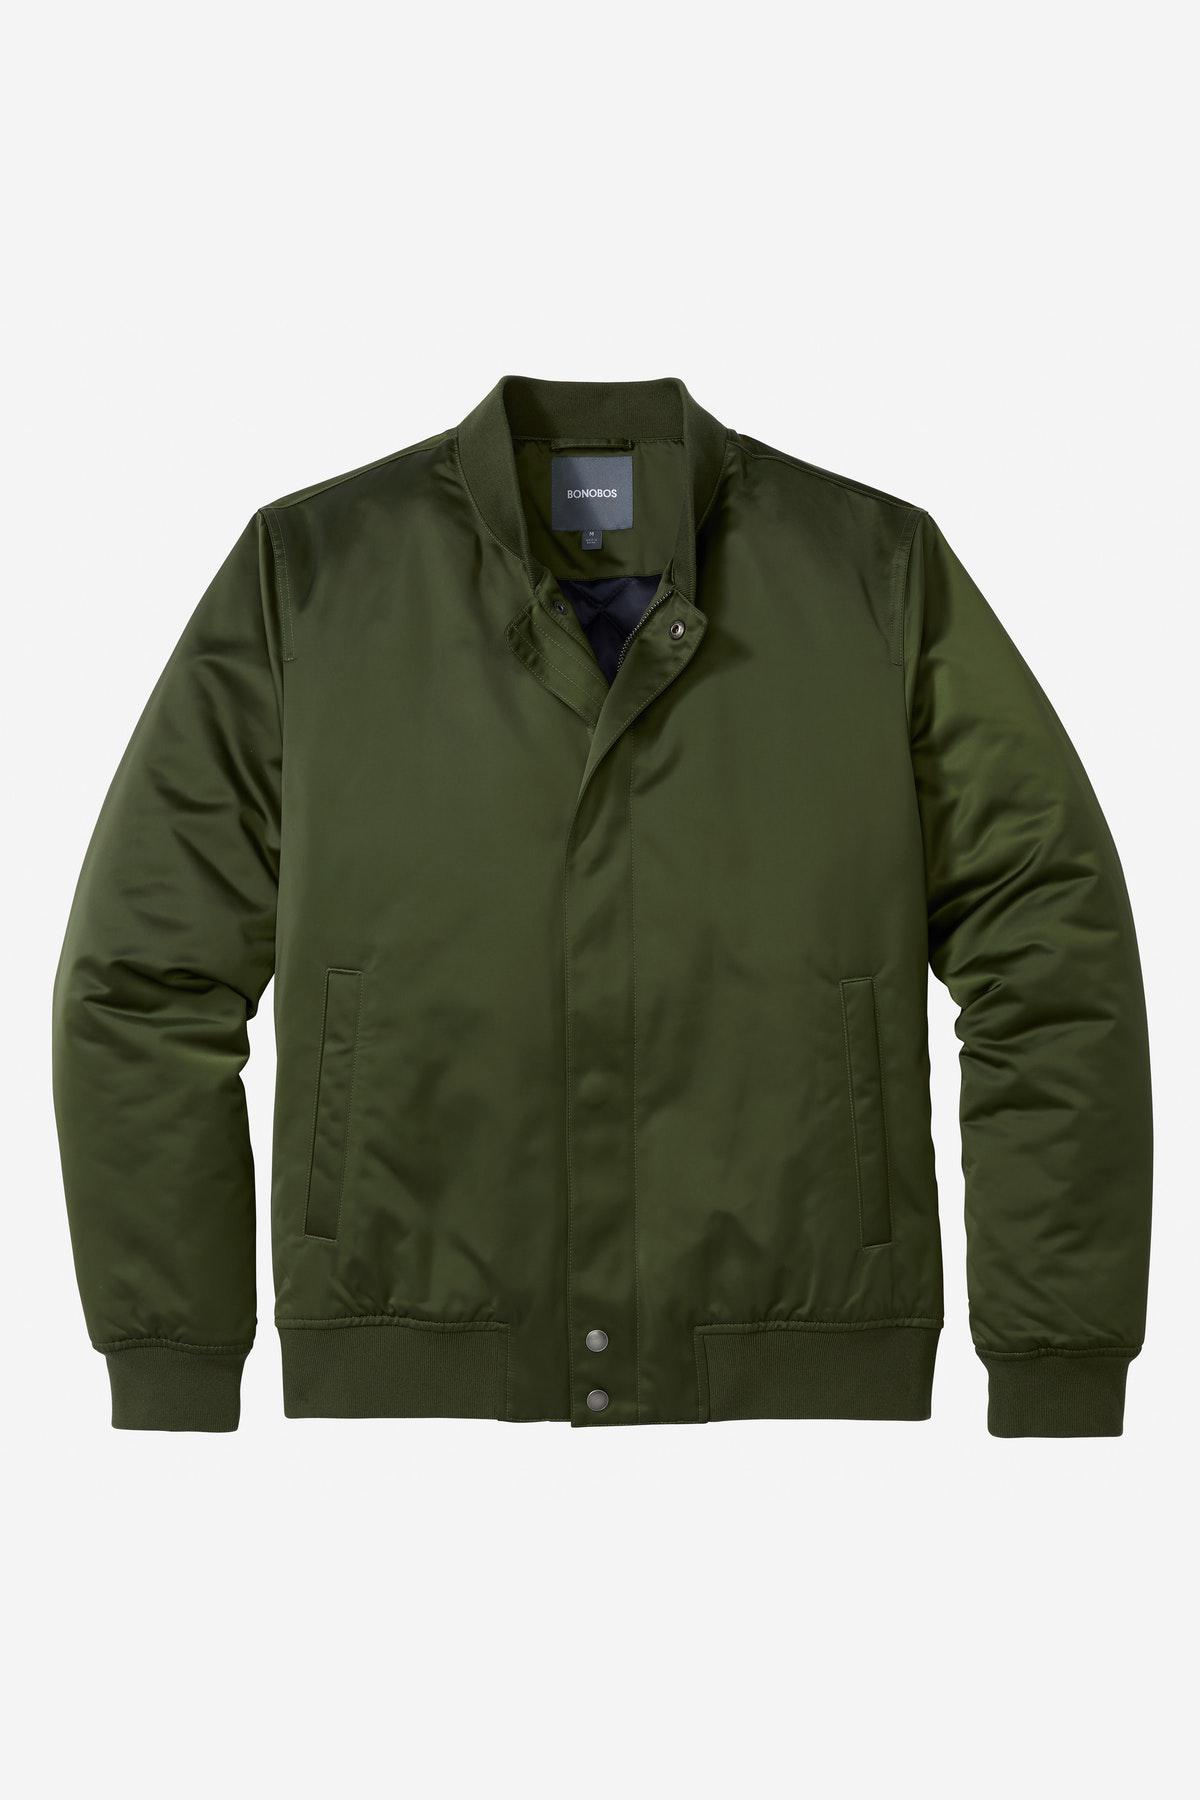 Bonobos Synthetic The Quilted Boulevard Bomber Jacket in Military Green ...